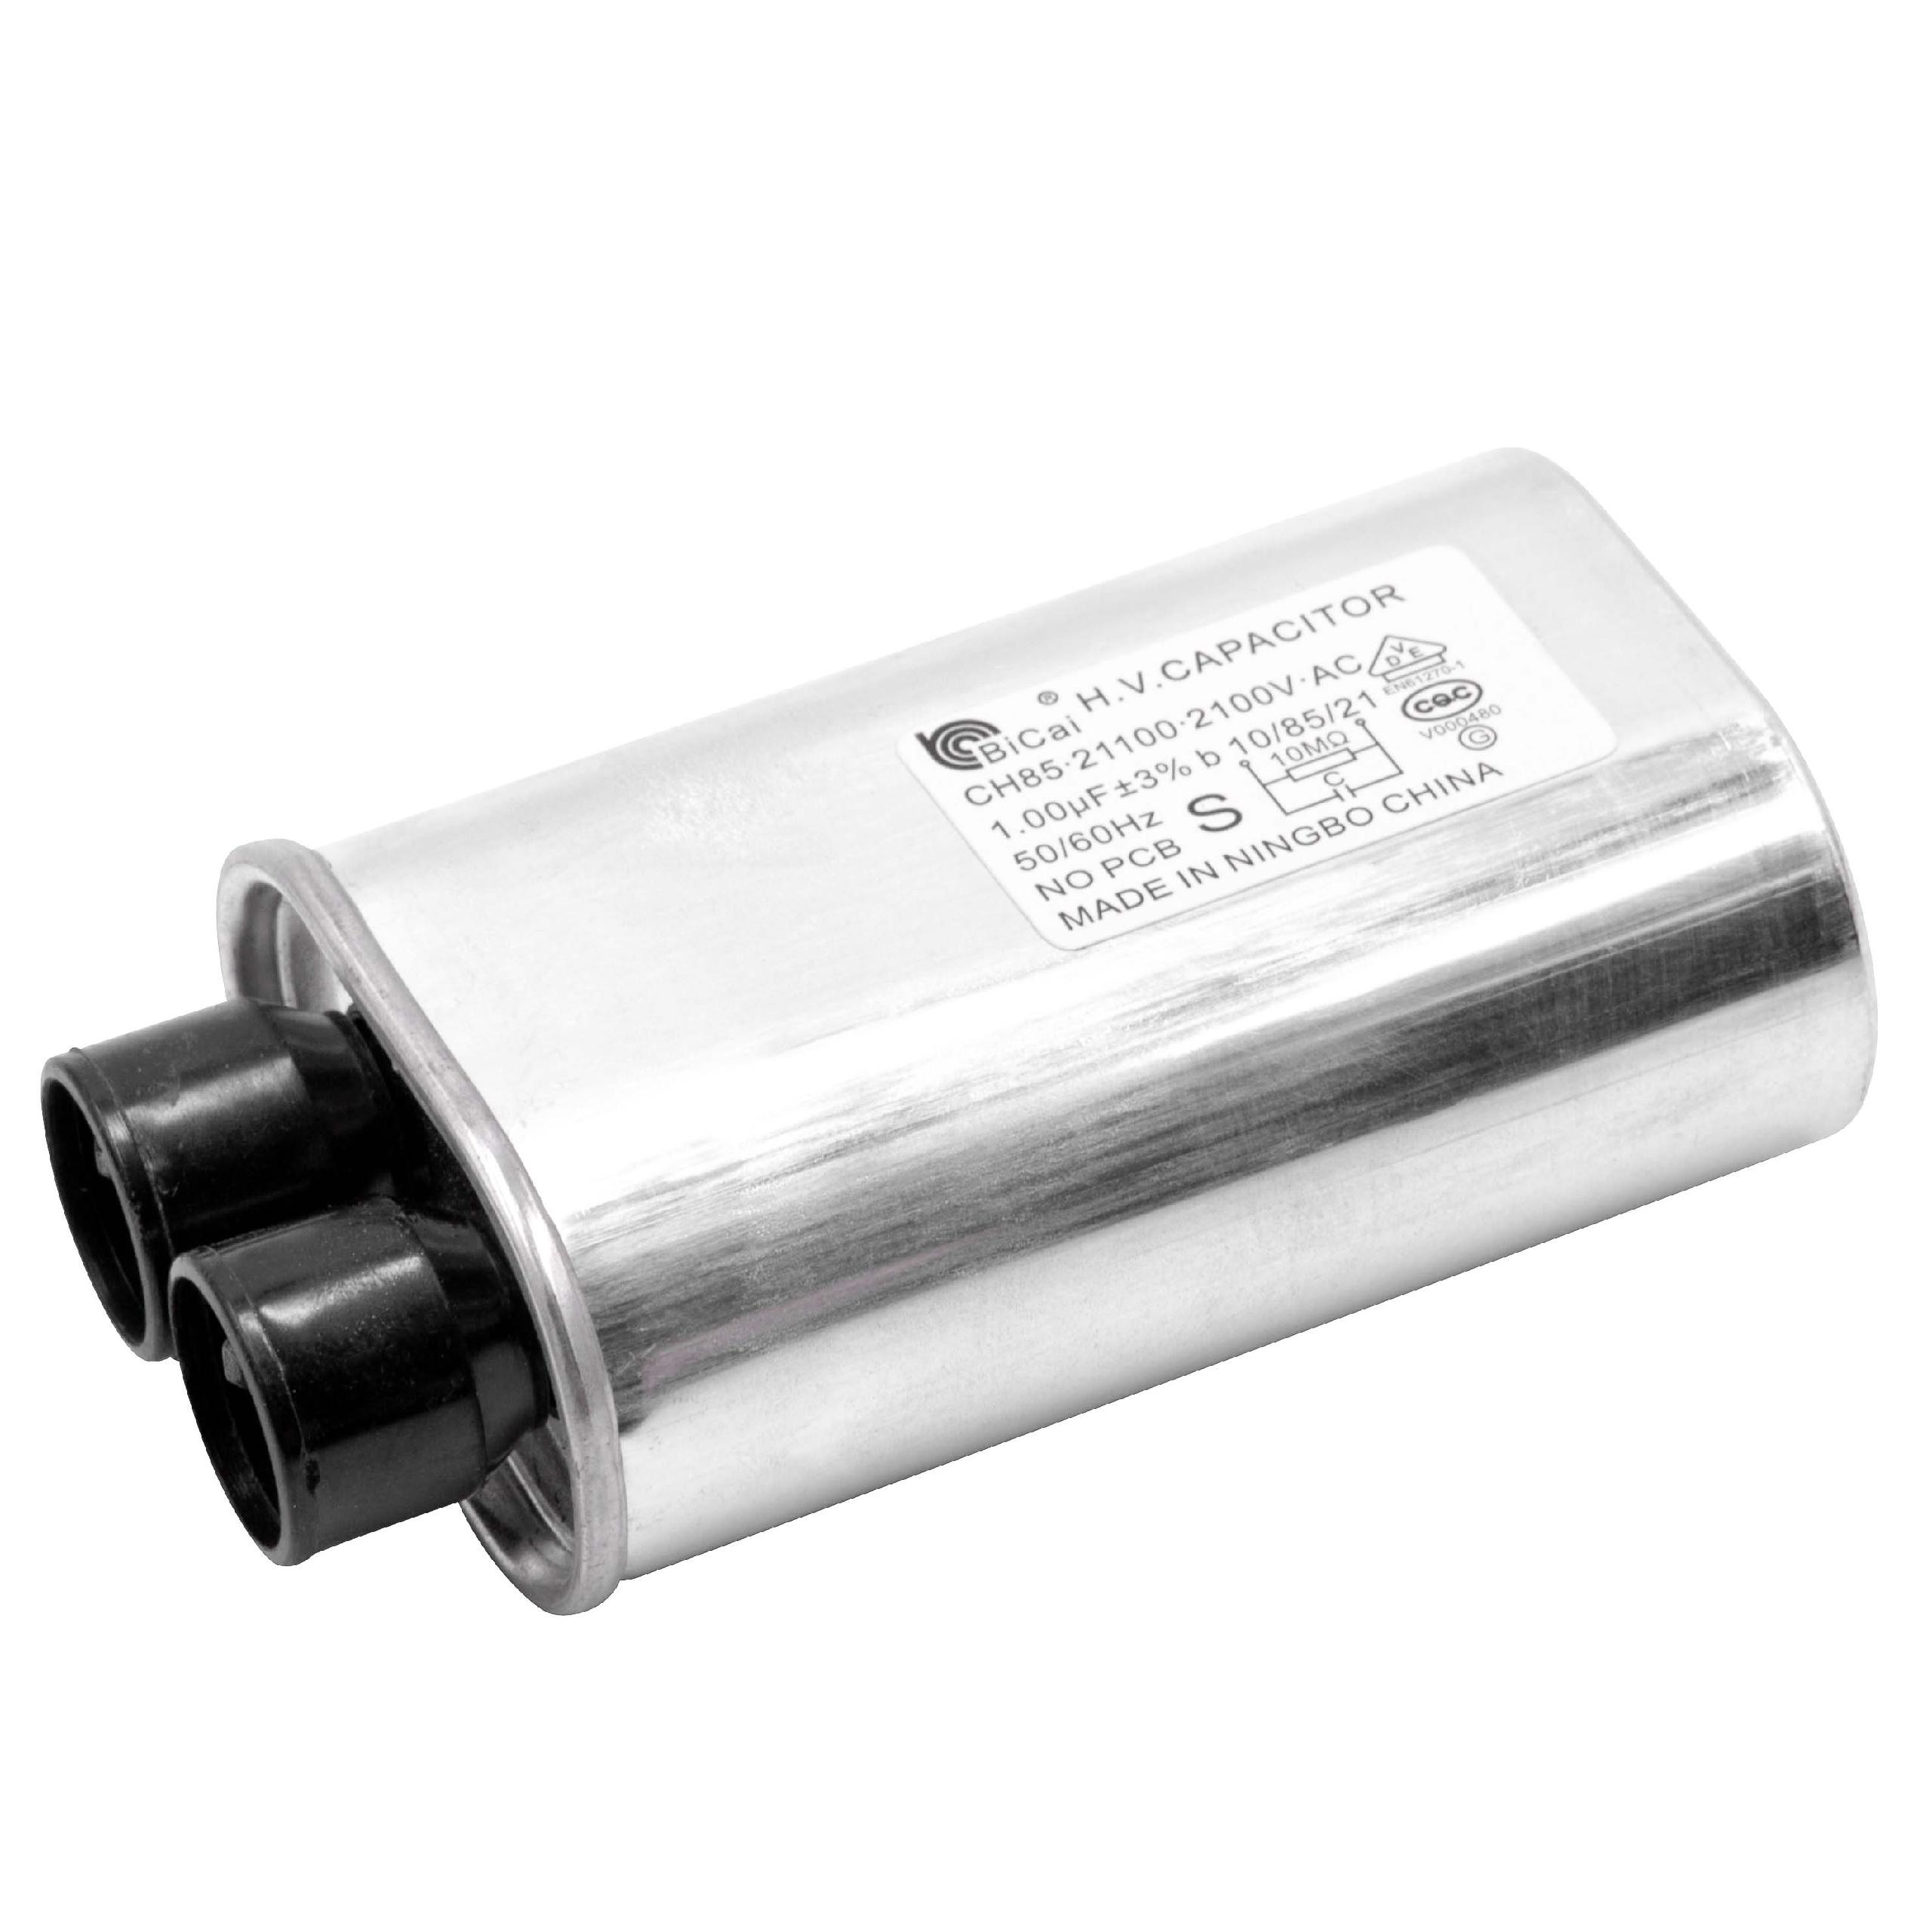 High Voltage capacitor Replacement Part replaces CH85-21100 for Microwave Oven